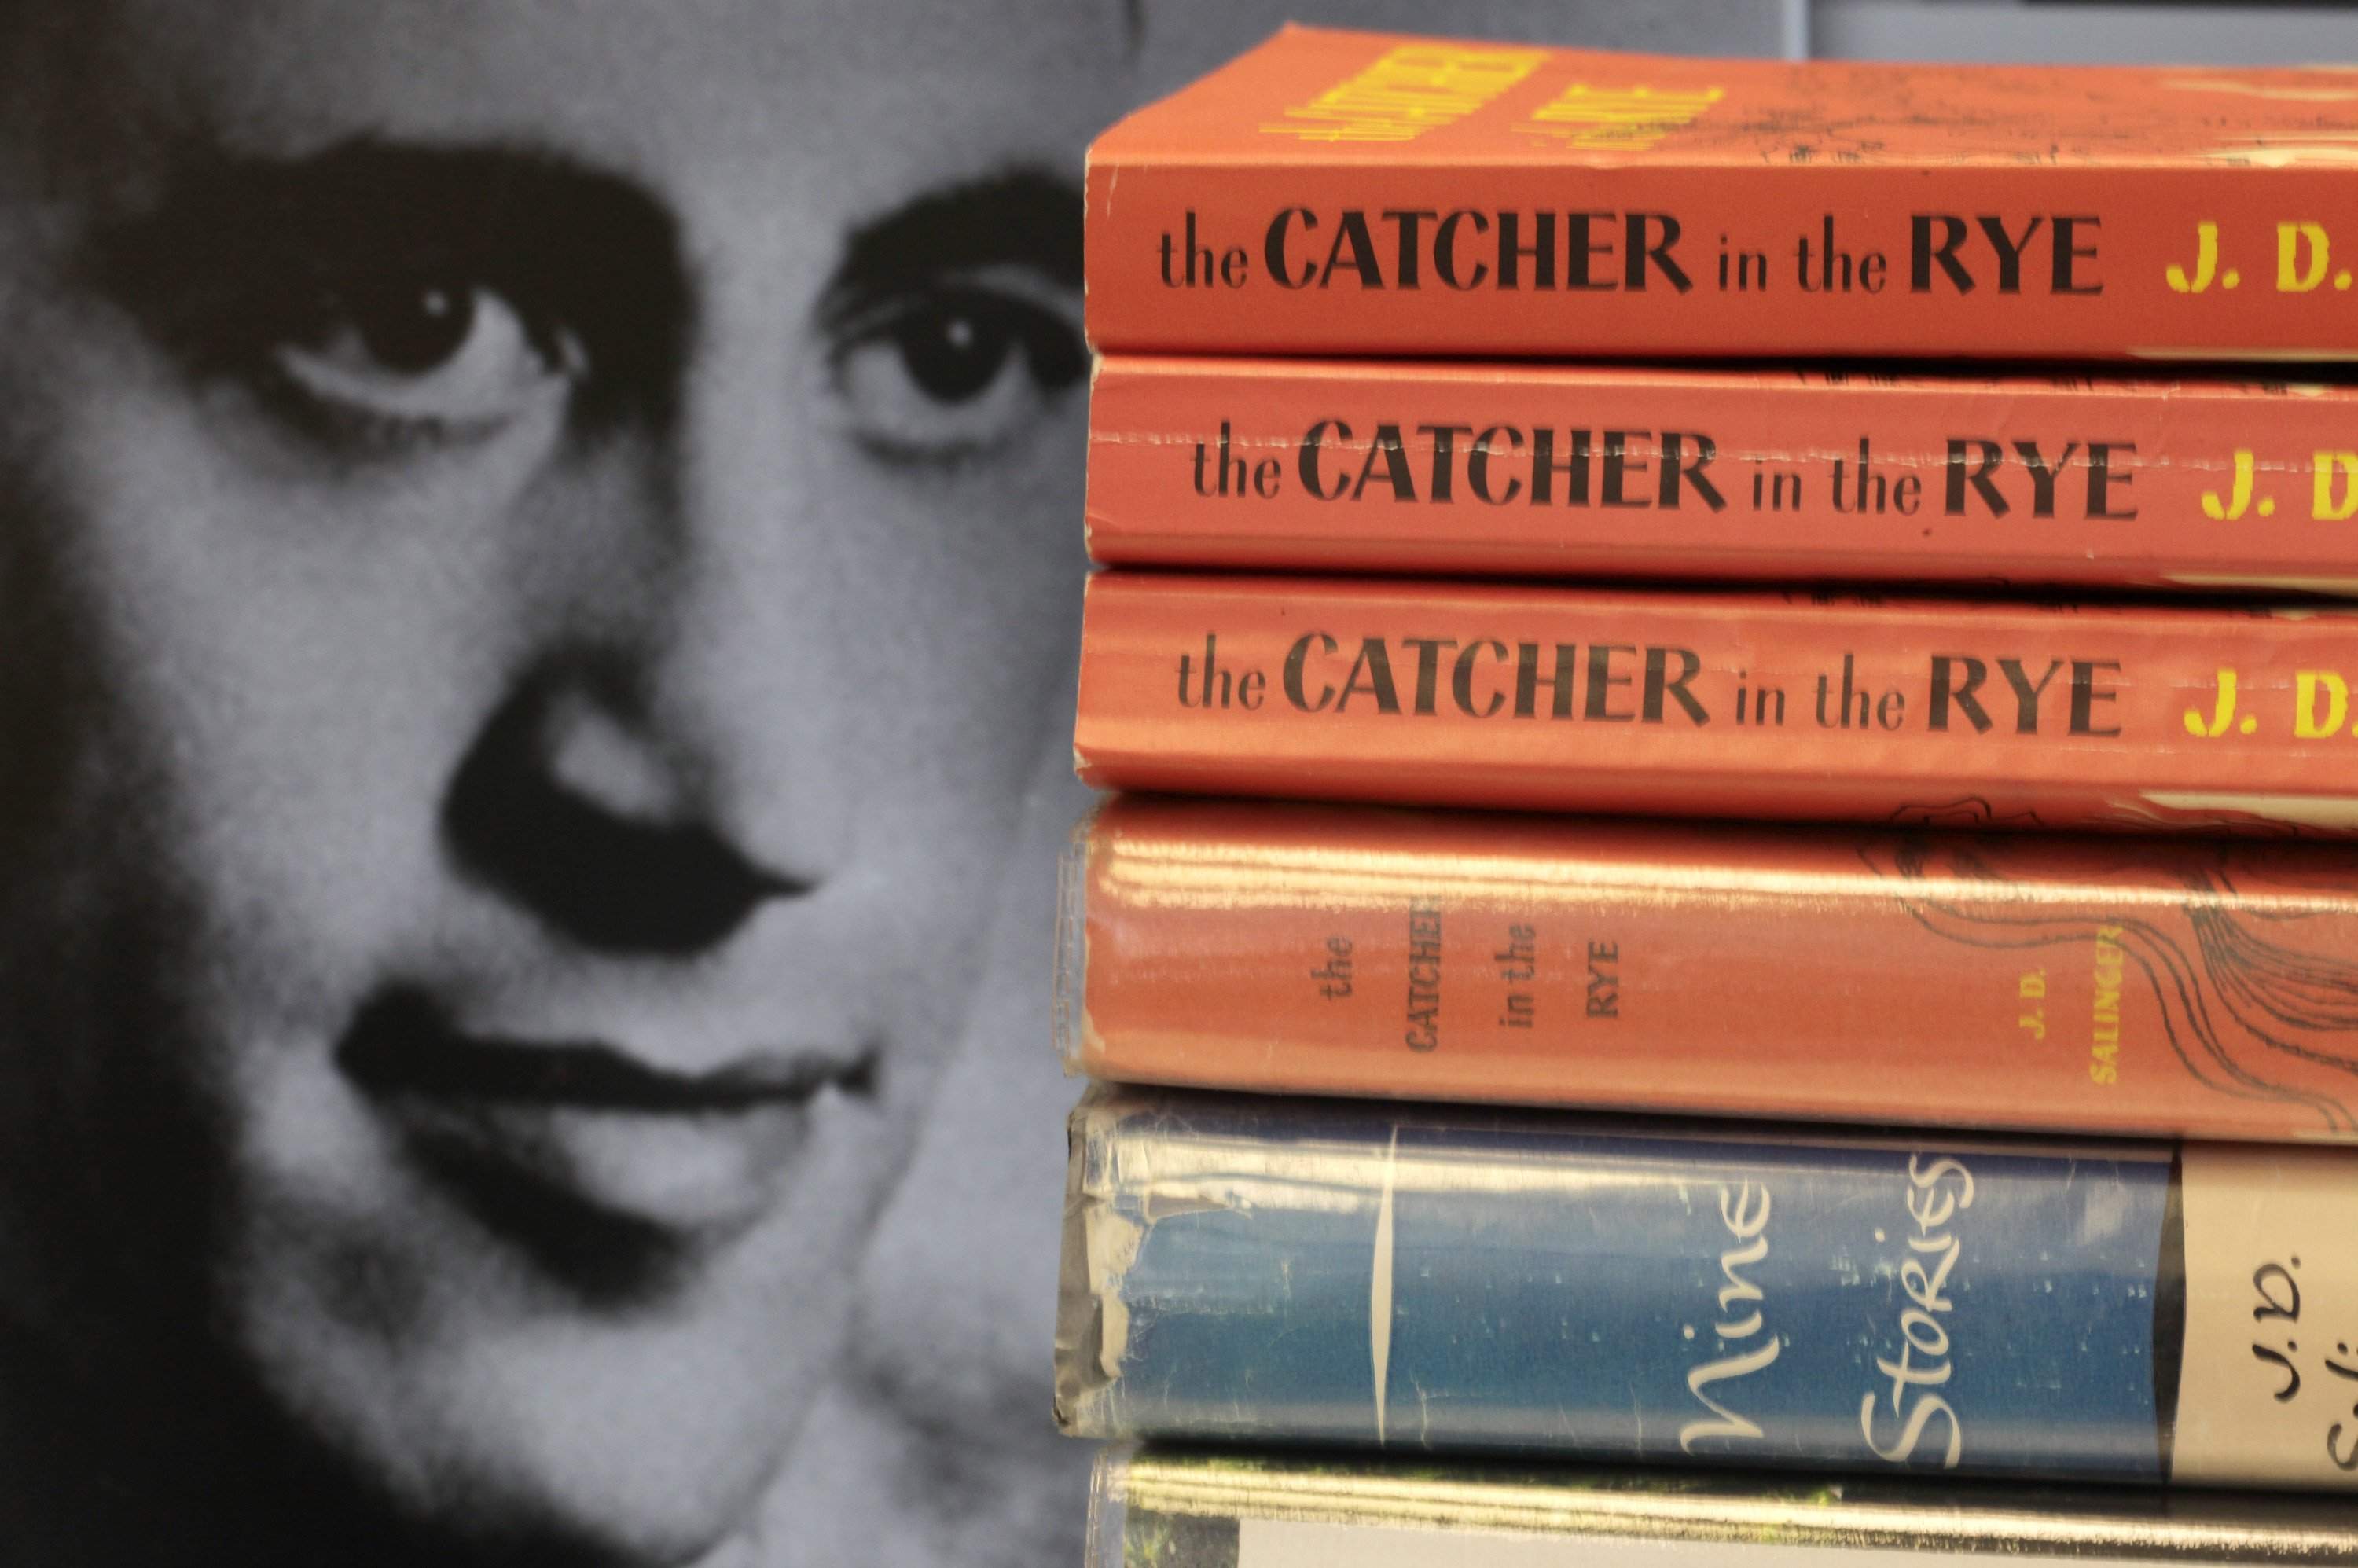 jd salinger writing style catcher in the rye